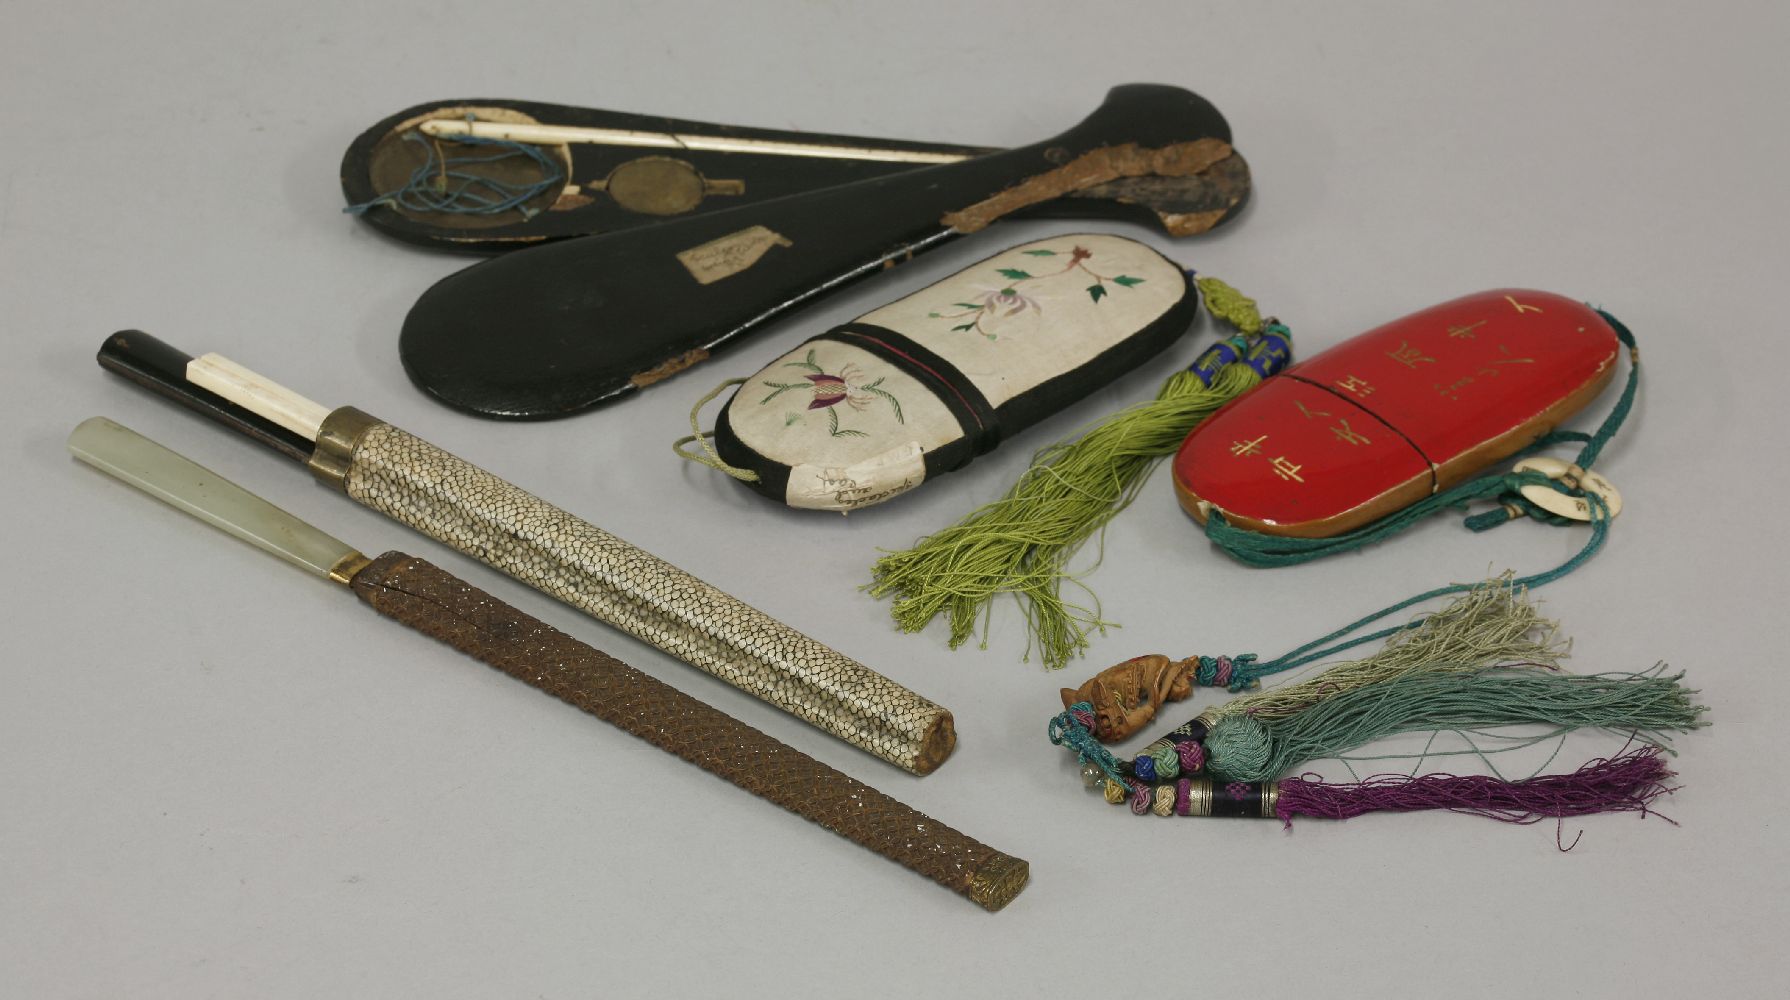 An eating set, shagreen case, 30cm, a knife with jade handle and diapered wood sheath, an